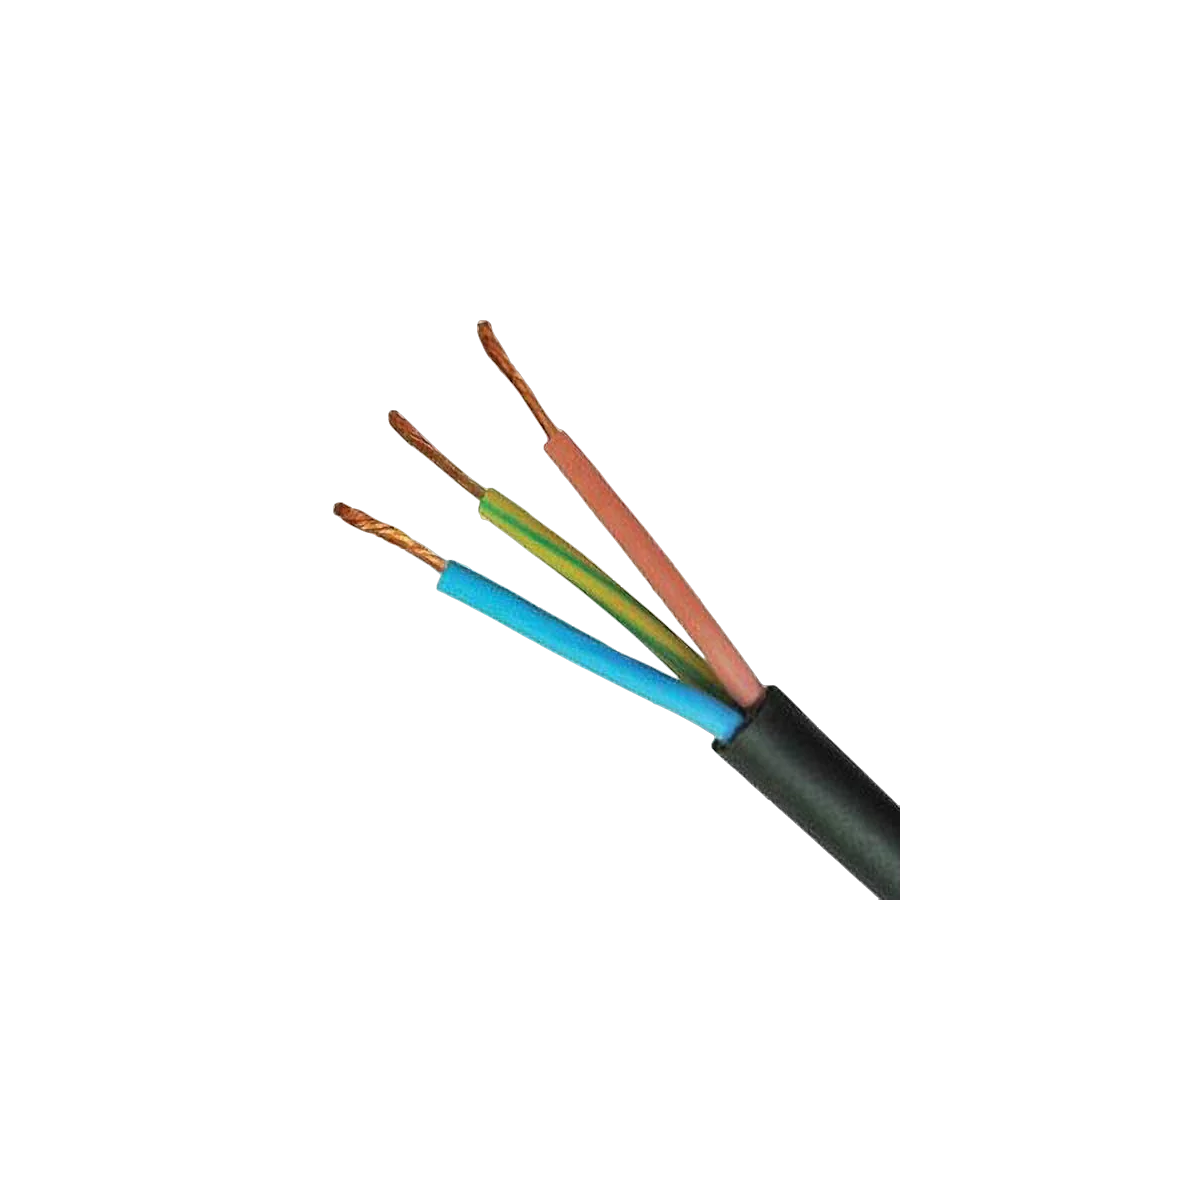 2.5mm x 3 Core H07RN-F Cable - Price per metre, cut to length